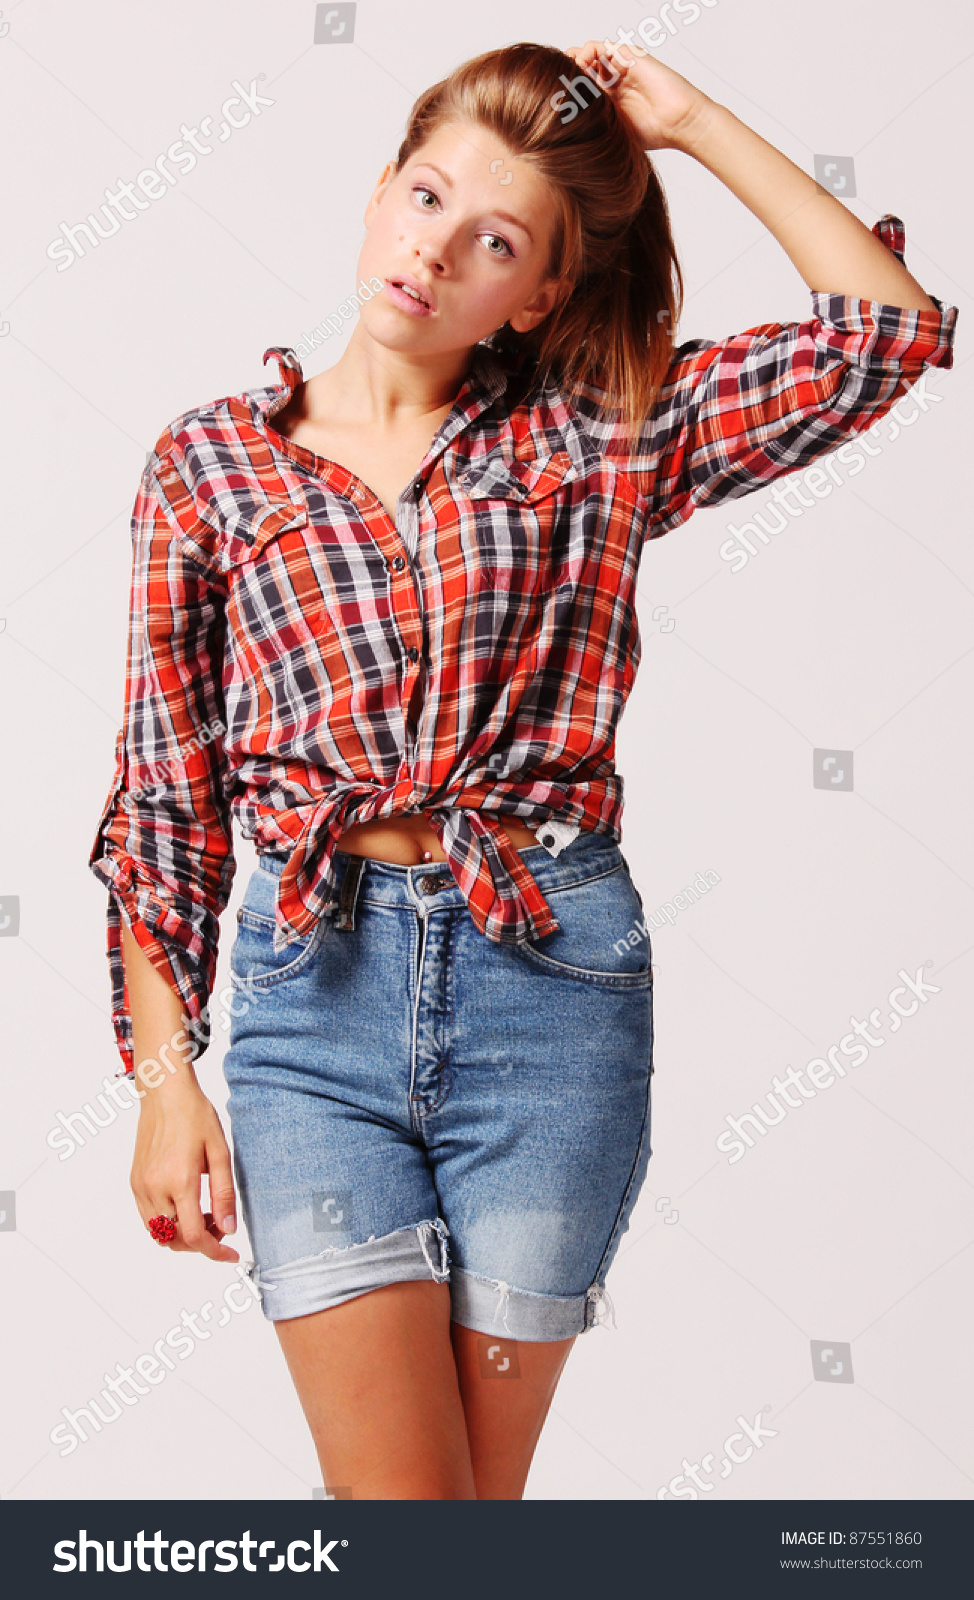 Young Girl Jeans Shirt Stock Photo 87551860 | Shutterstock